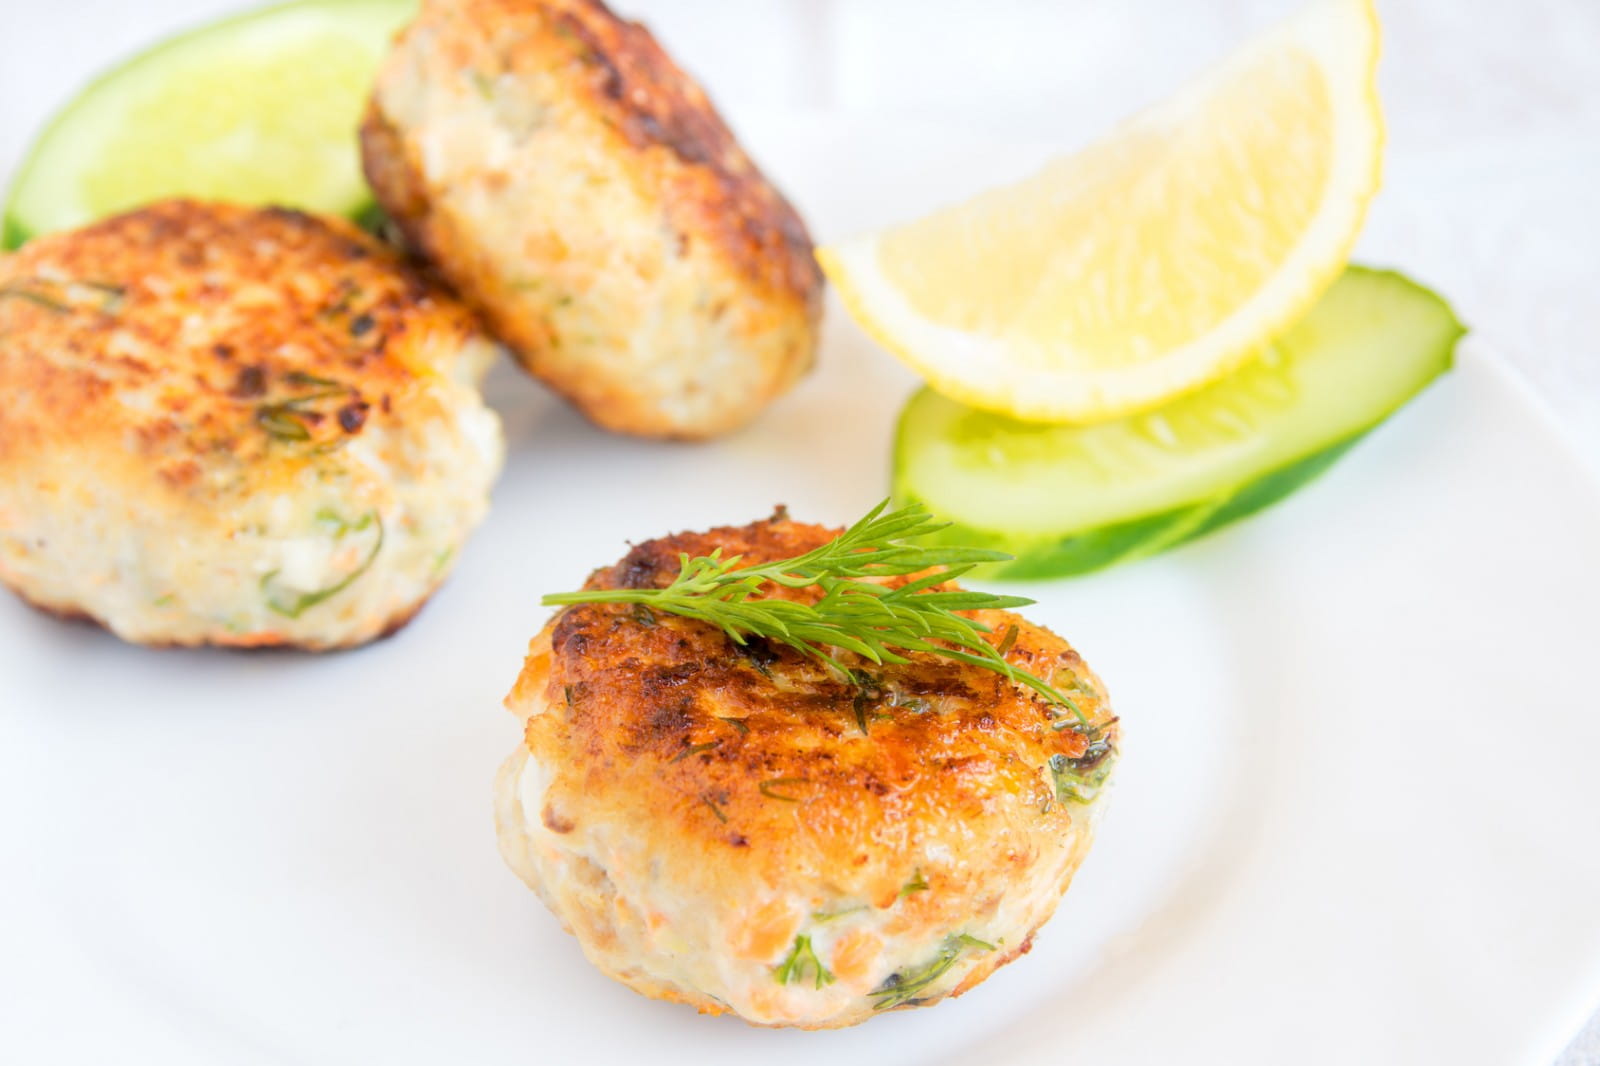 The best wine matches for fishcakes